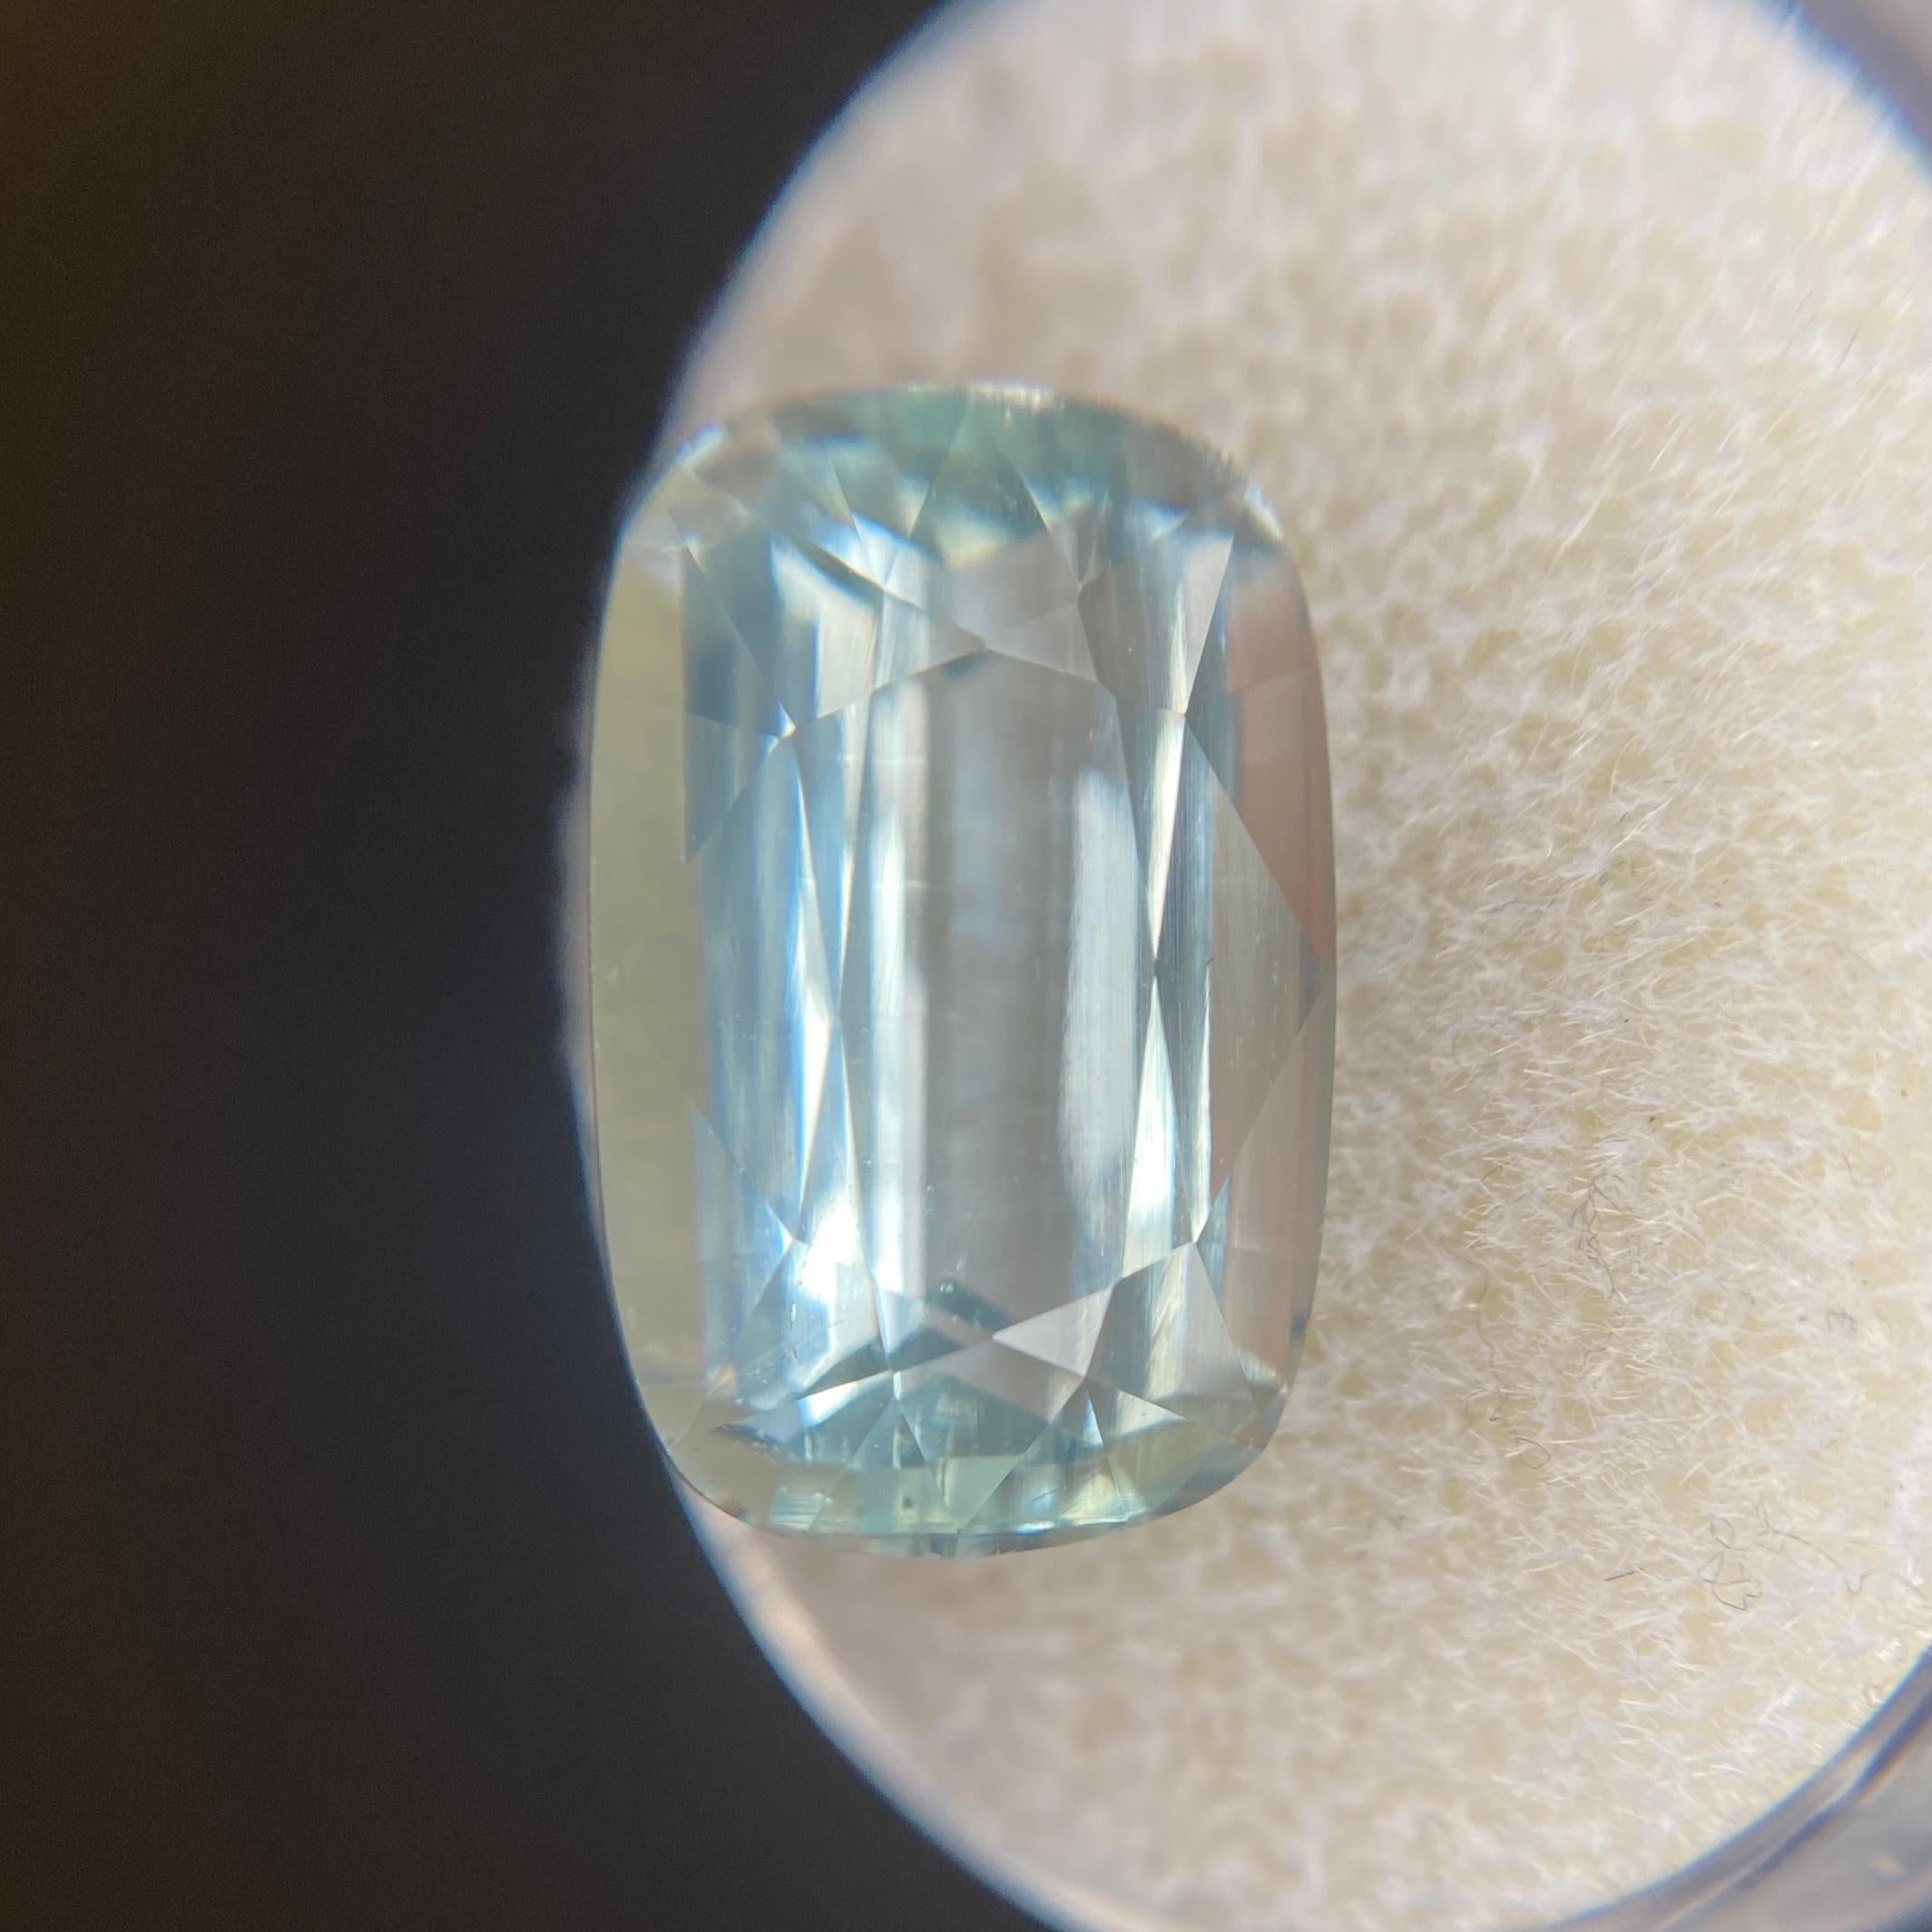 Natural Bright Blue Aquamarine Gemstone.

8.17 Carat with a beautiful bright vivid blue colour and excellent clarity. Very clean gem. Also has an excellent cushion cut with ideal polish to show great shine and colour, would look lovely in